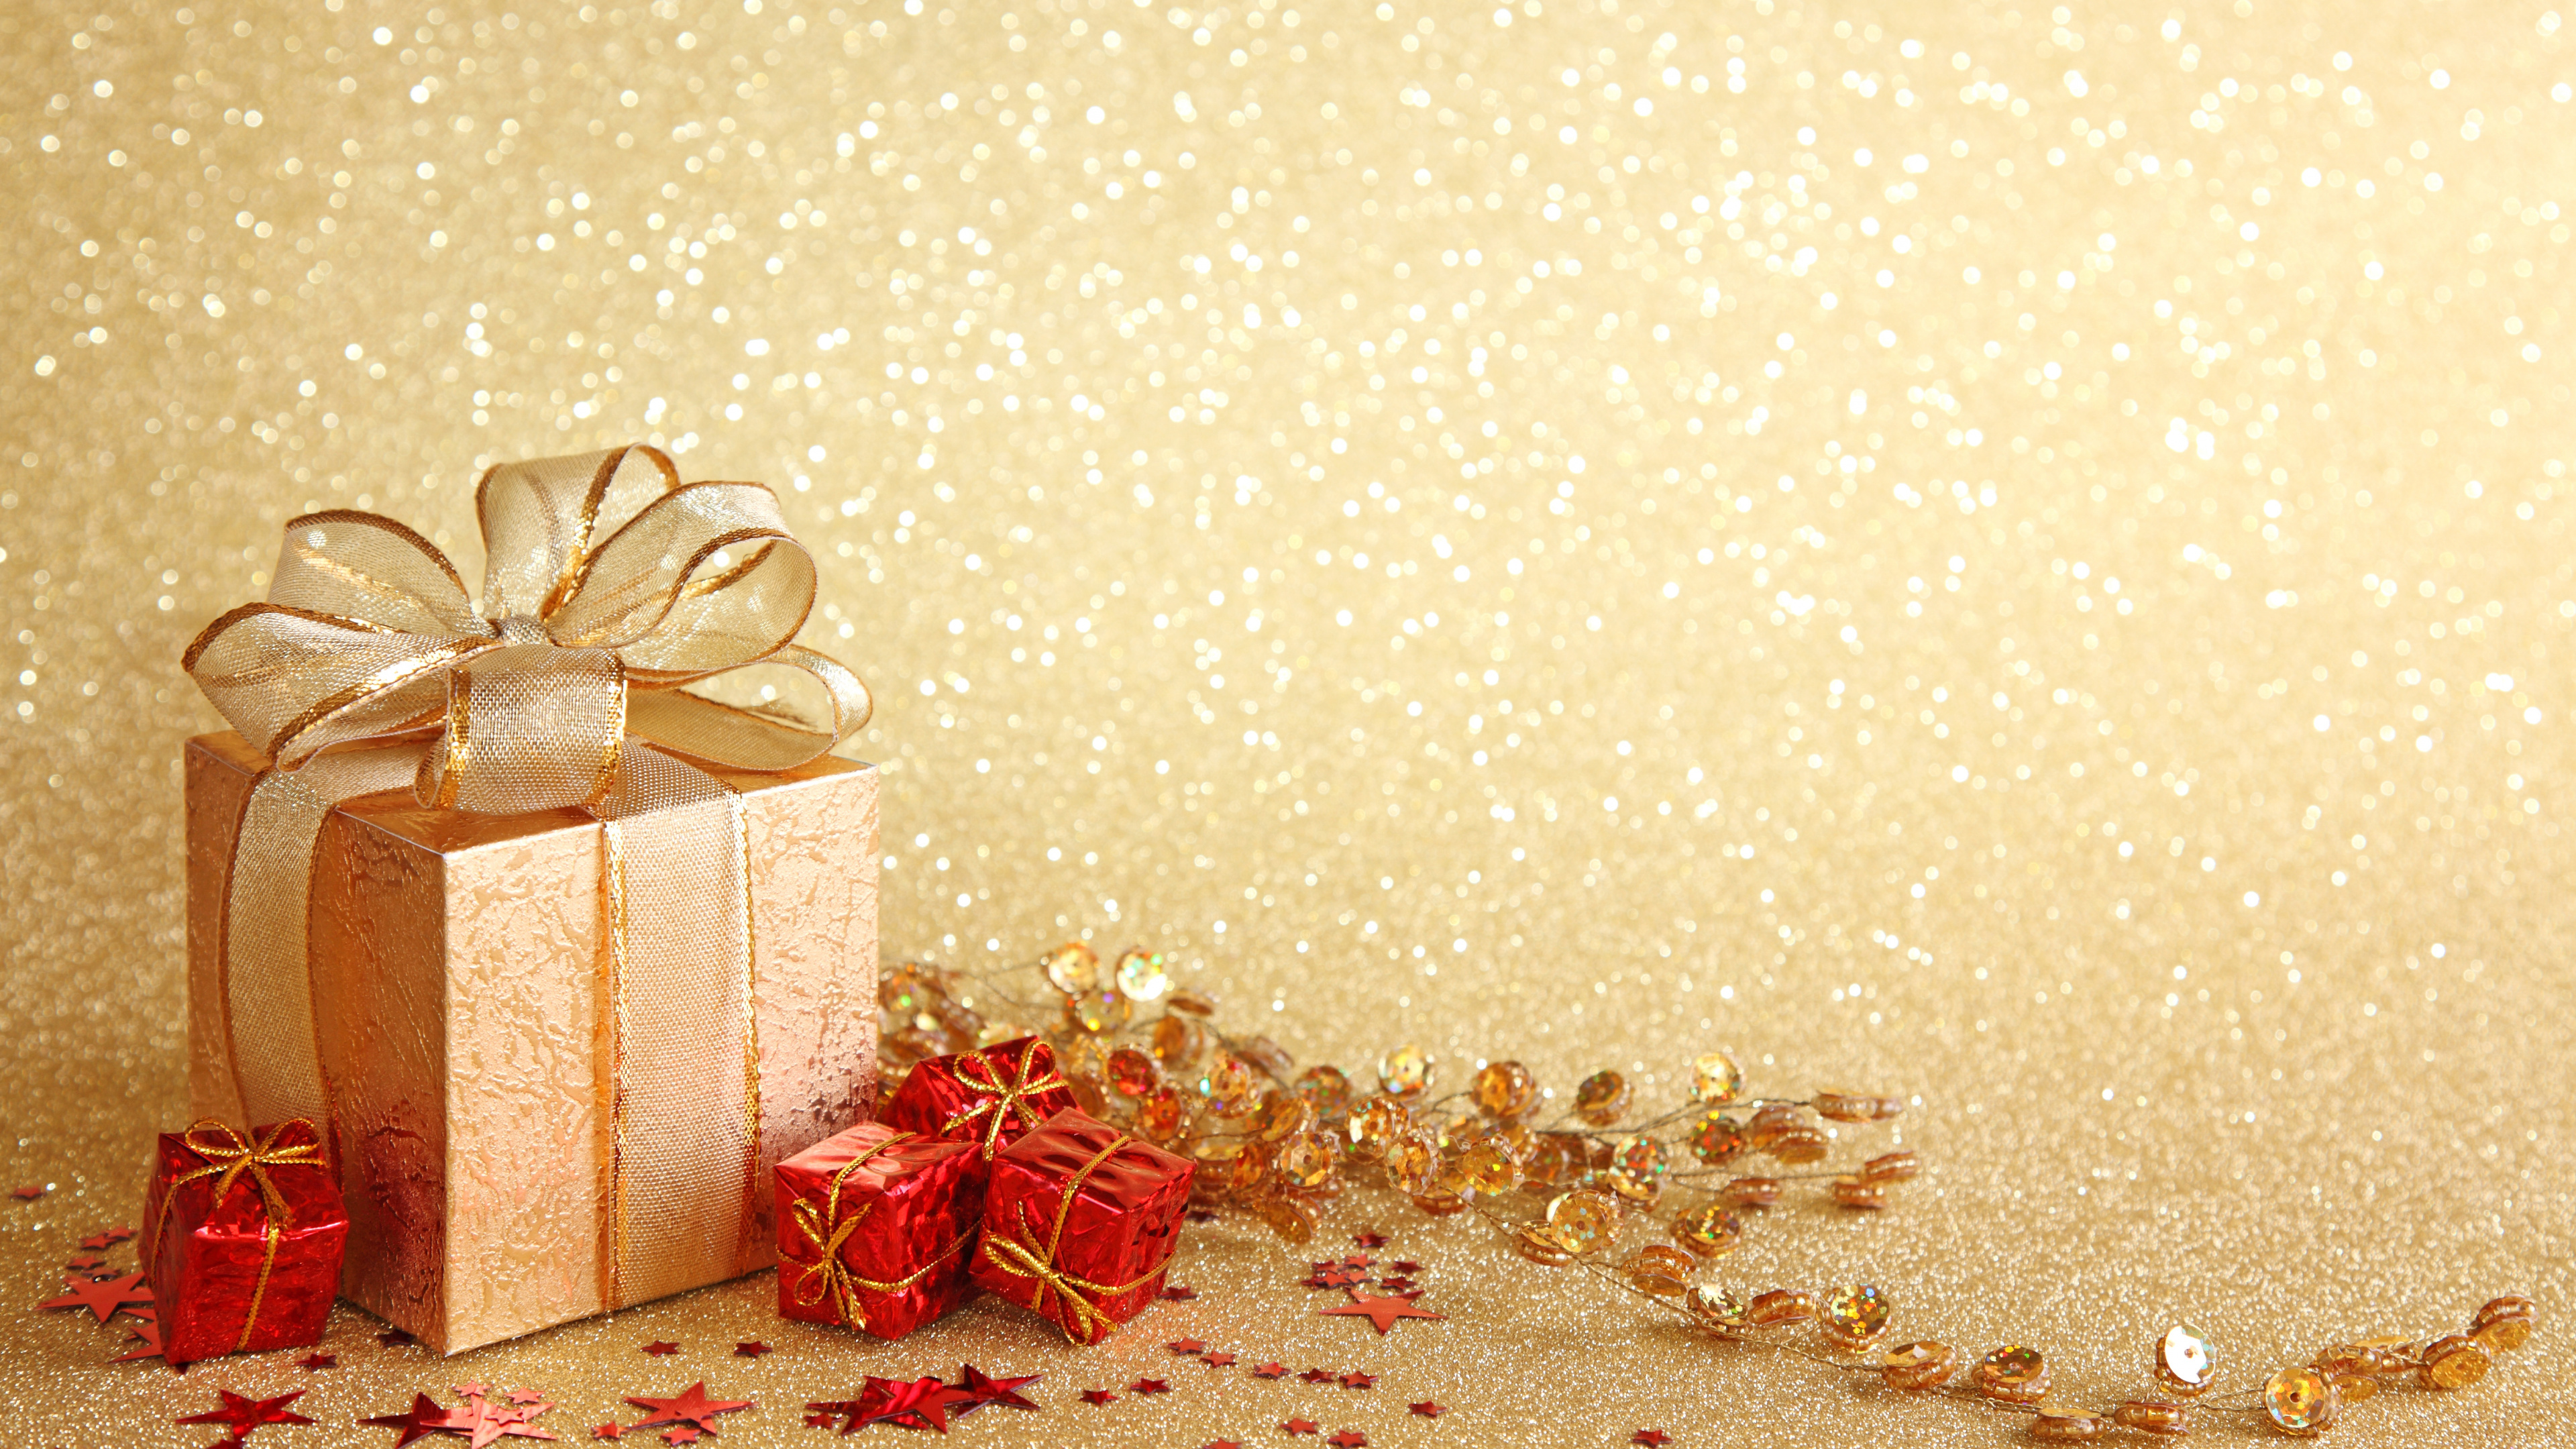 New Year, Happiness, Wish, Christmas Day, Present. Wallpaper in 3840x2160 Resolution